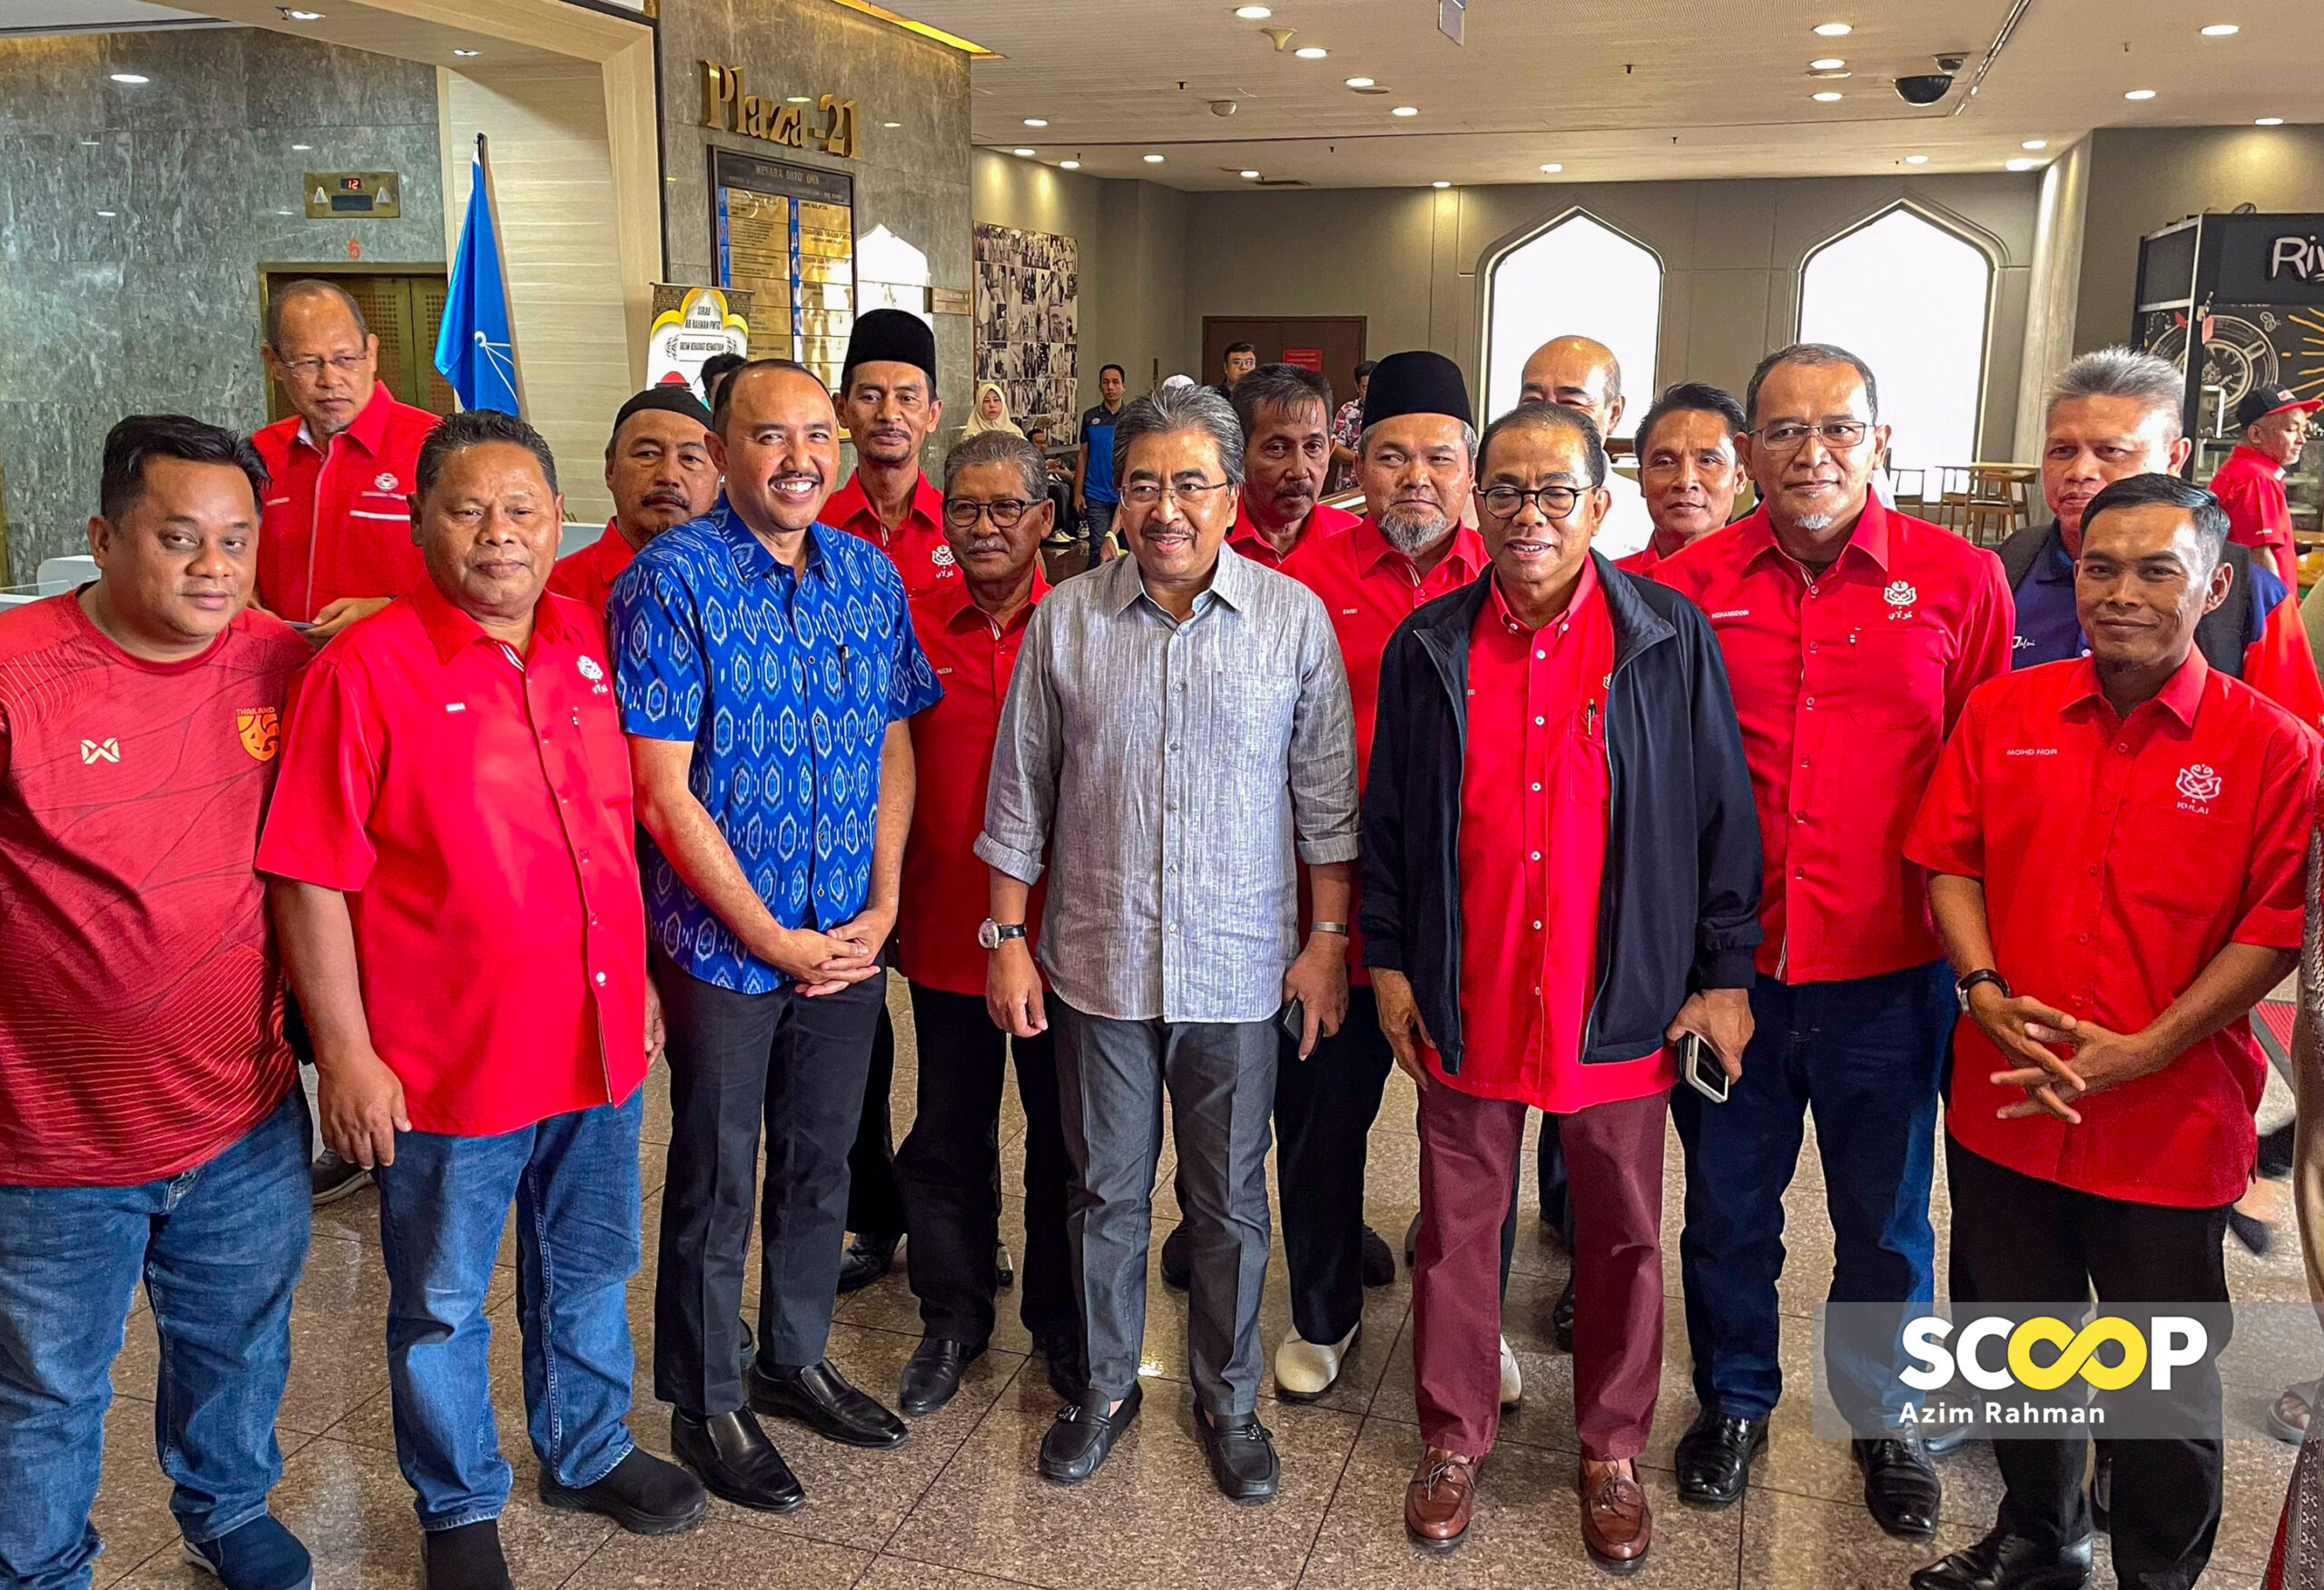 [UPDATED] Umno Supreme Council members arrive at HQ for emergency meeting